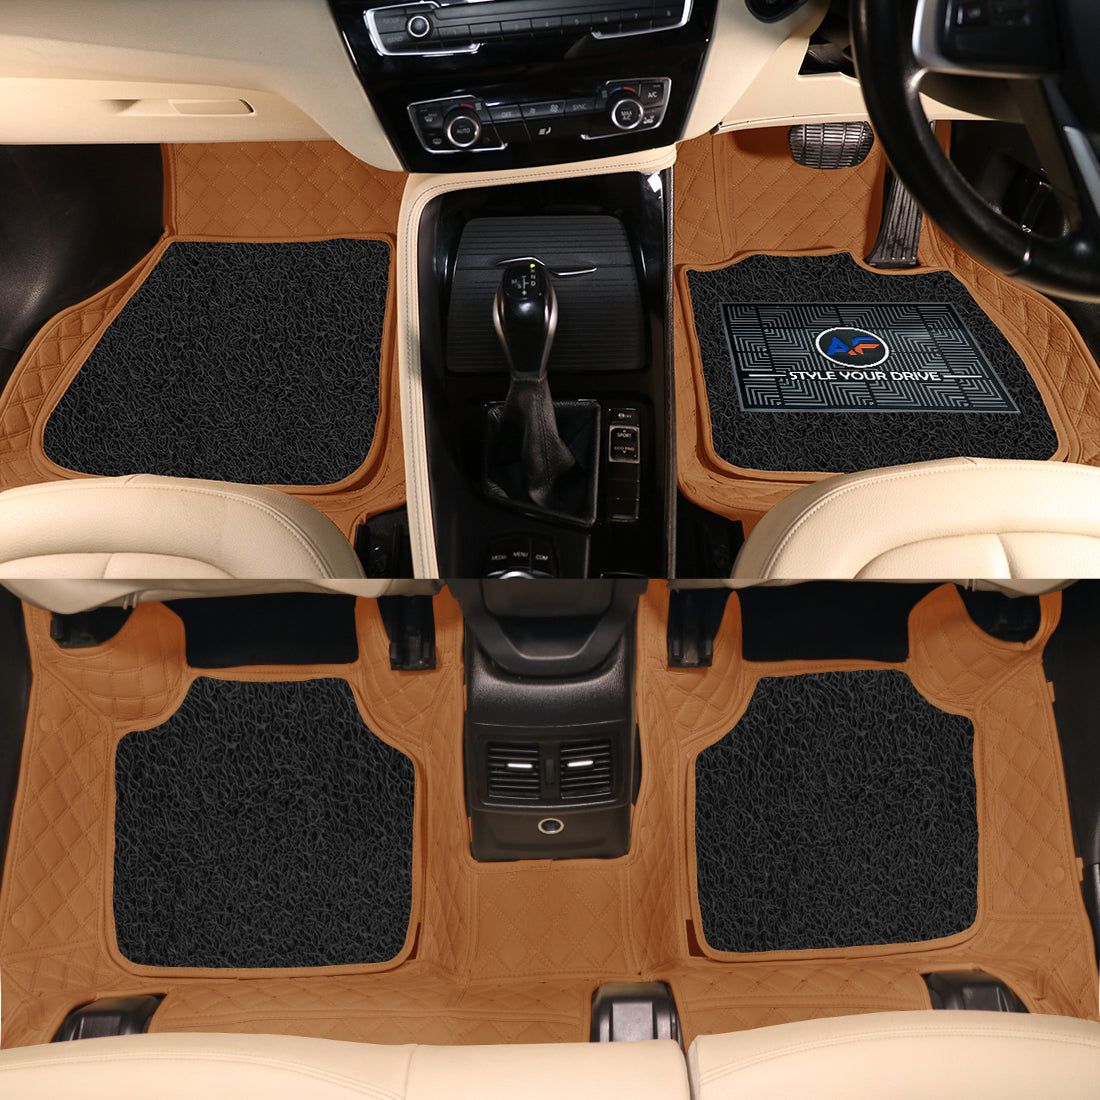 Toyota Land Cruiser 2015-22-7D Luxury Car Mat, All Weather Proof, Anti-Skid, 100% Waterproof & Odorless with Unique Diamond Fish Design (24mm Luxury PU Leather, 2 Rows)